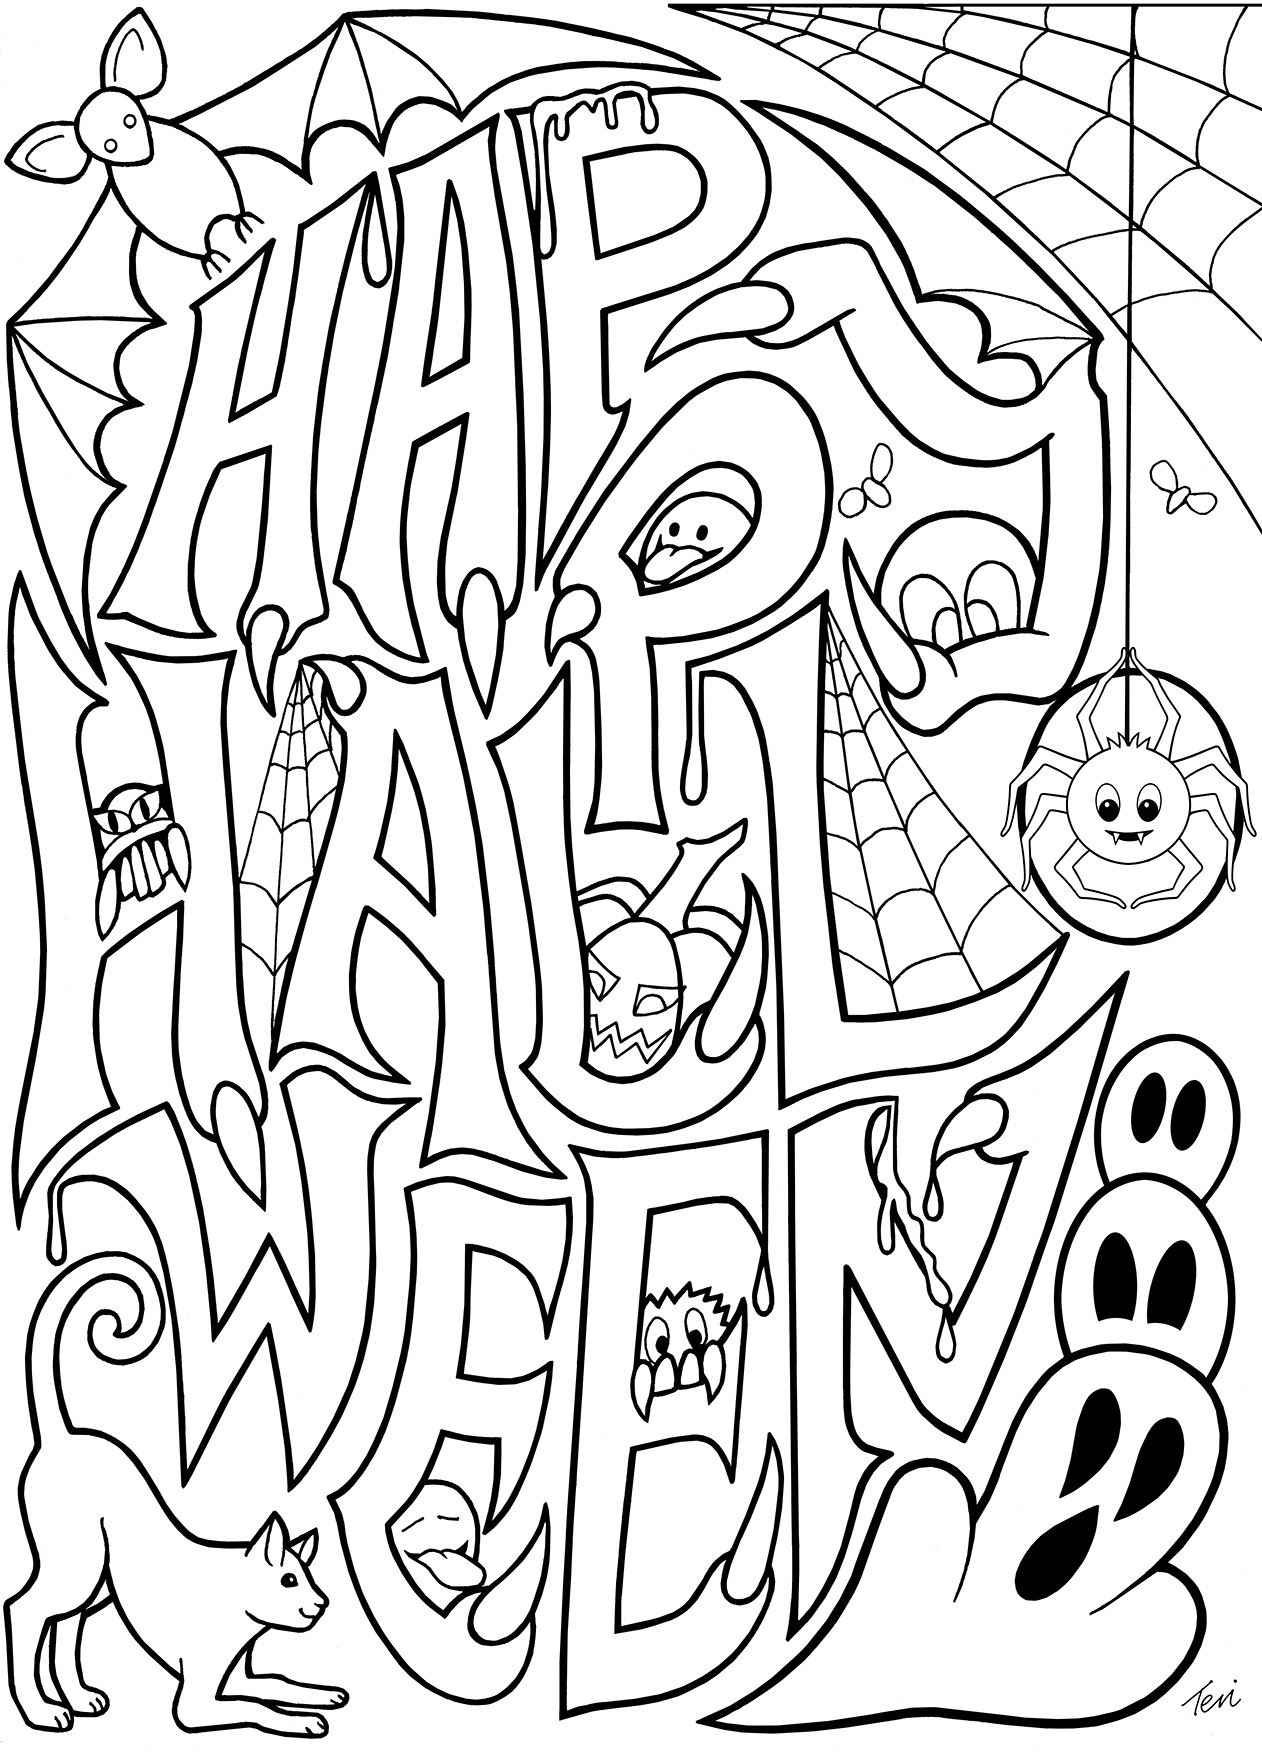 free halloween coloring sheets for adults free adult coloring book pages happy halloween by blue free for adults coloring sheets halloween 